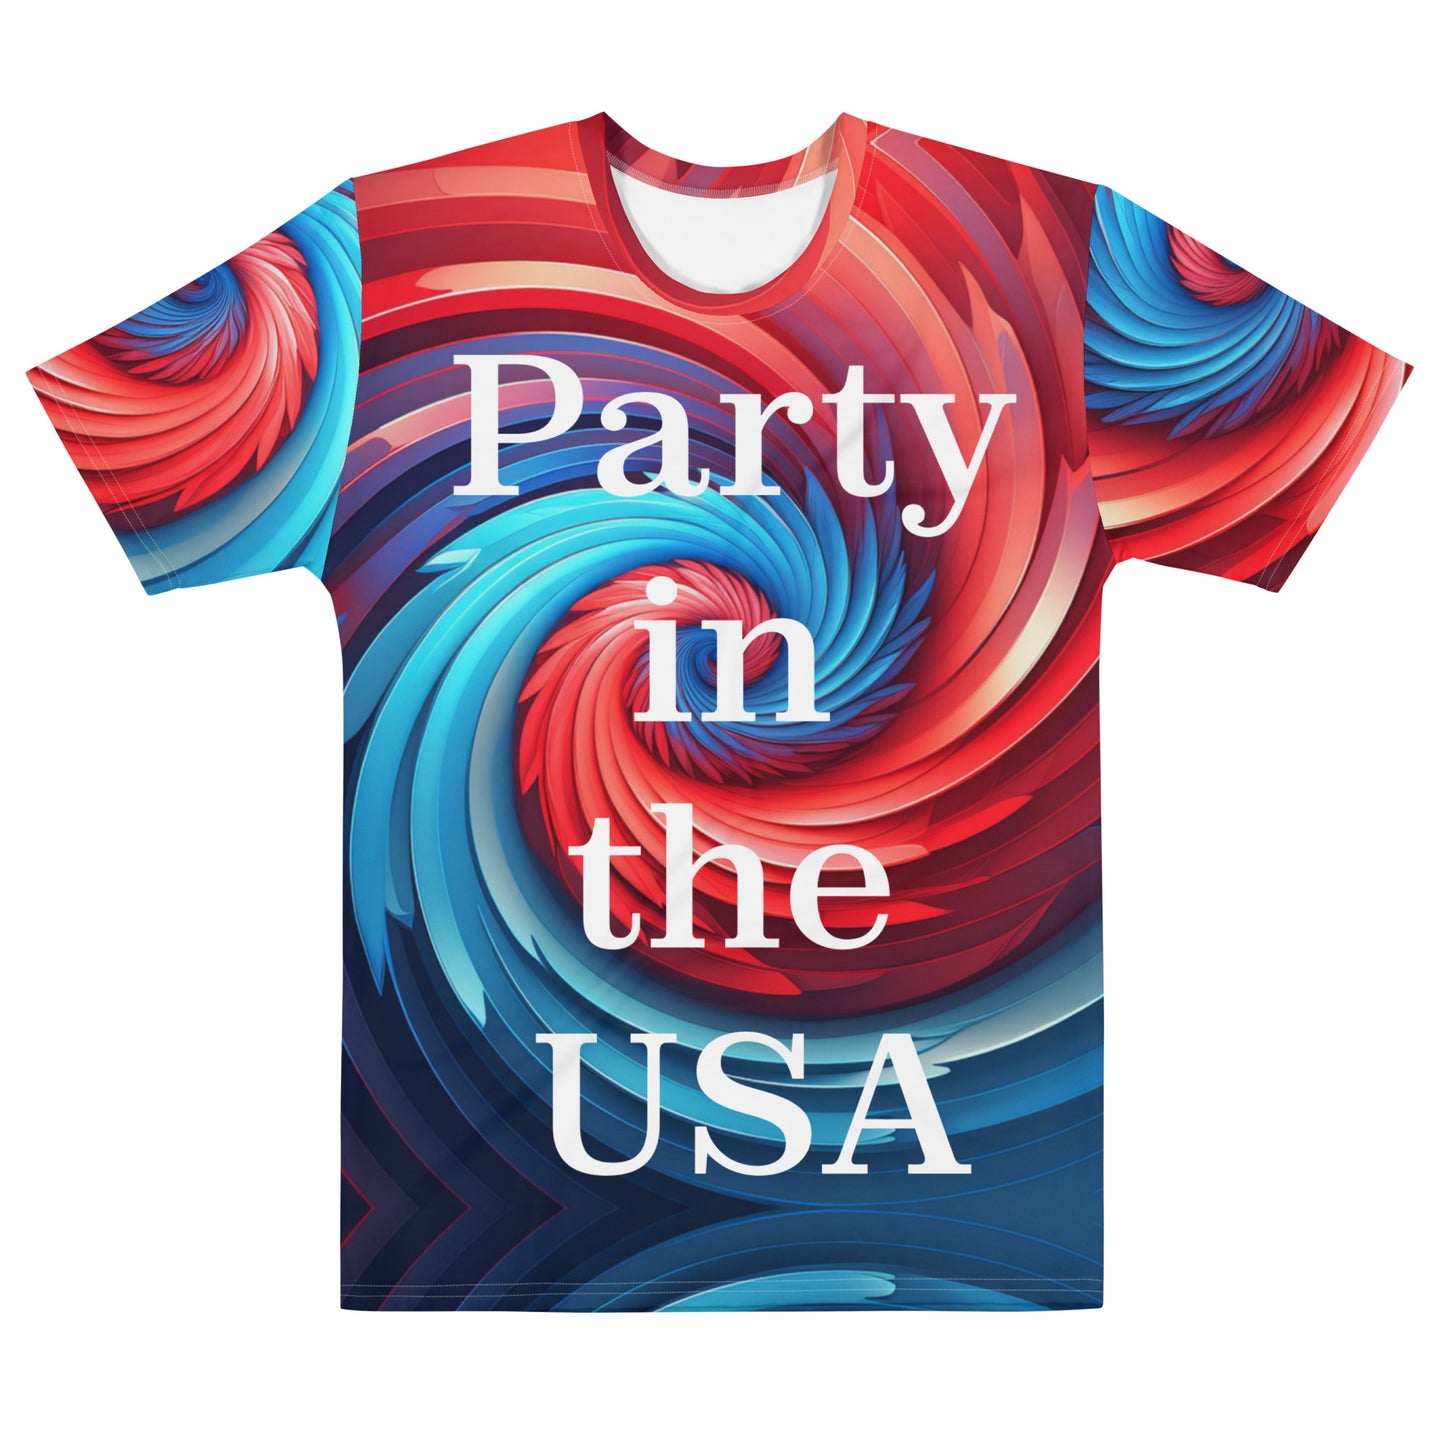 Mens Party in the USA t-shirt